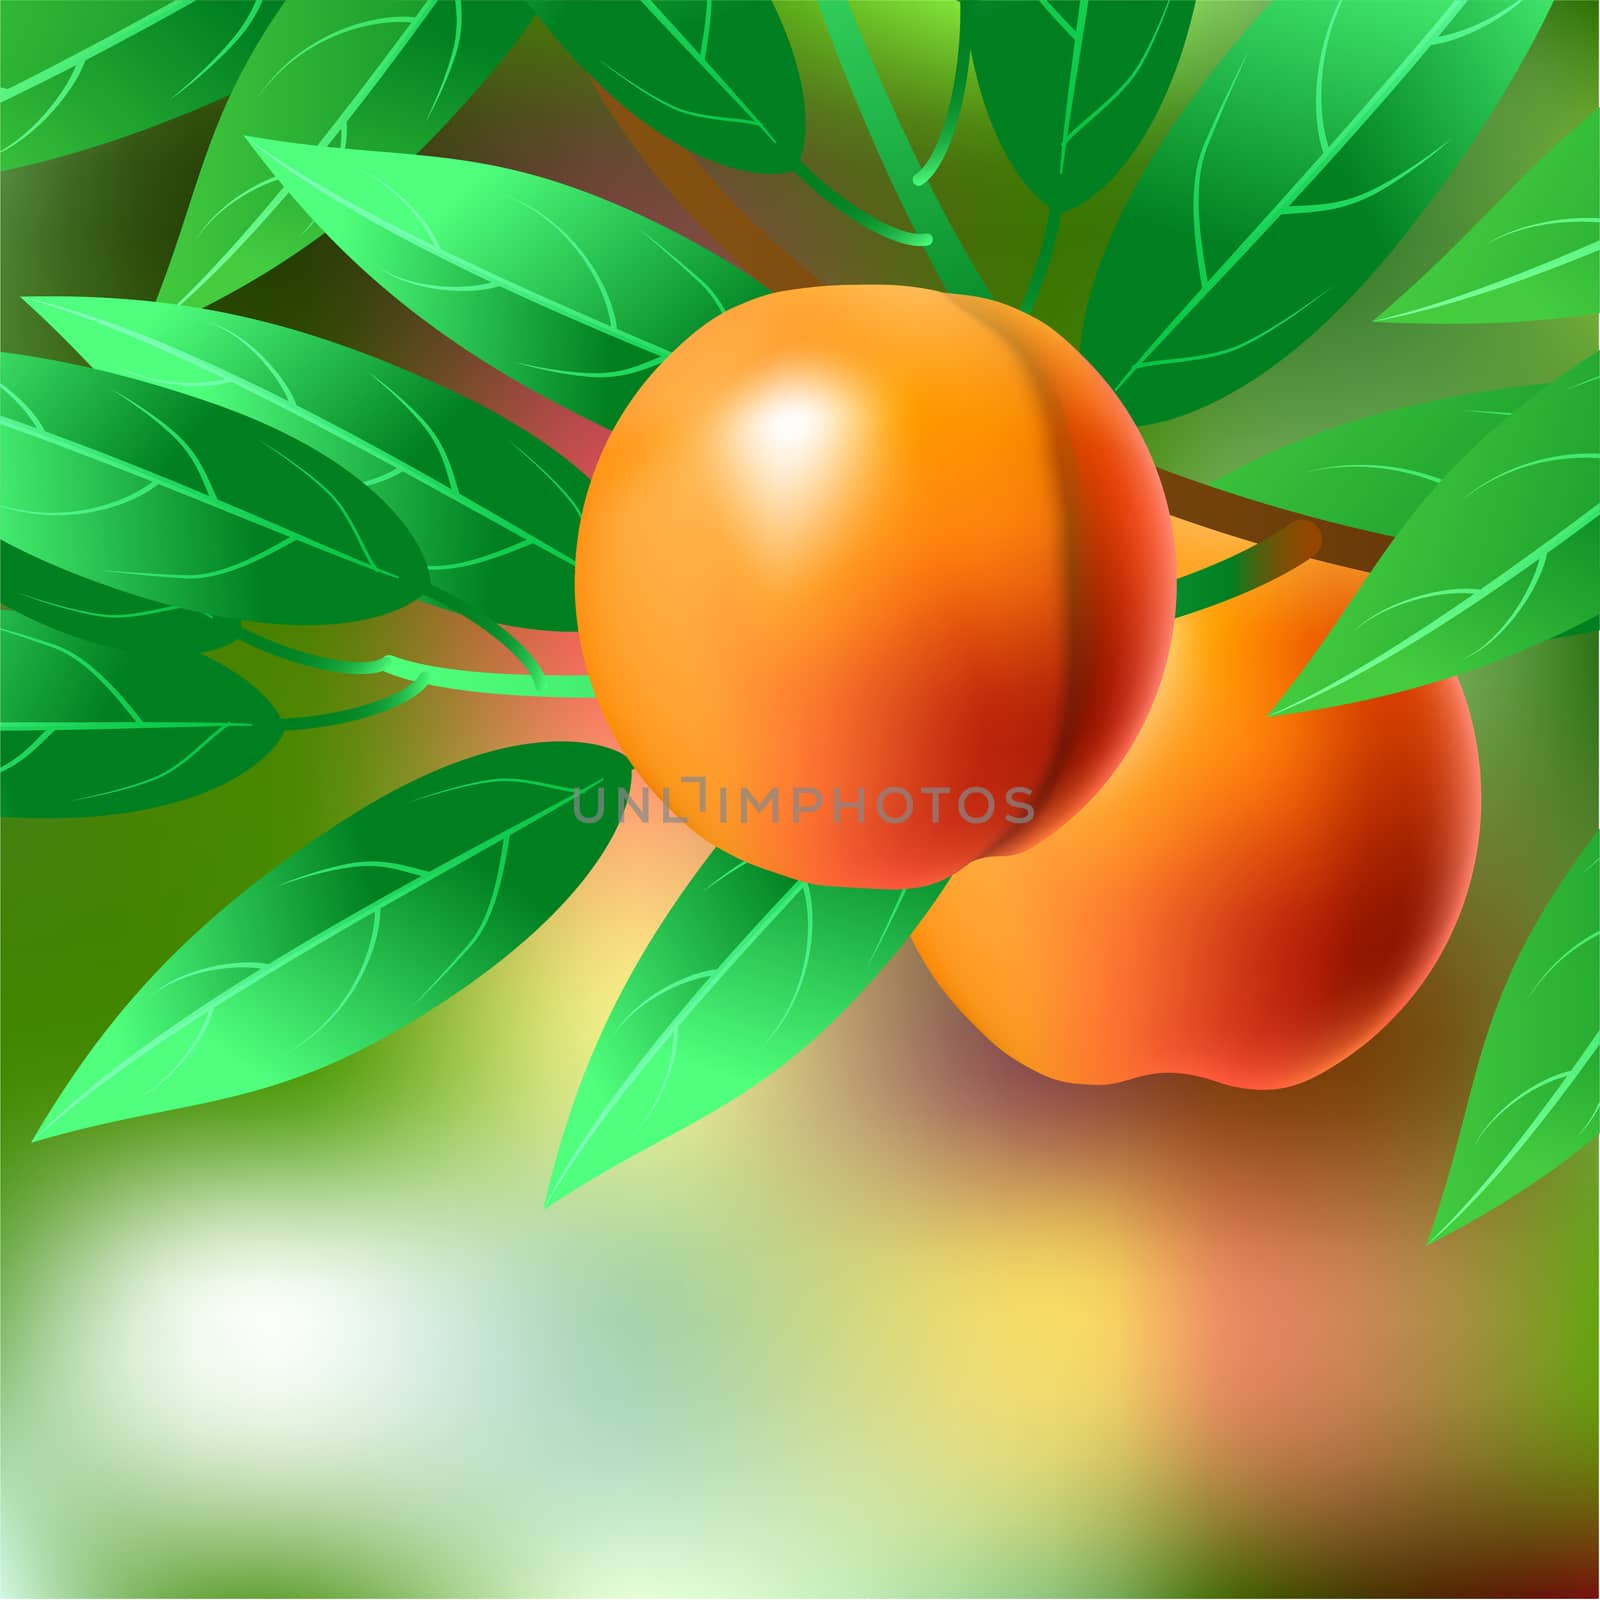 Orange, juicy, sweet peach on a branch for your design. illustration